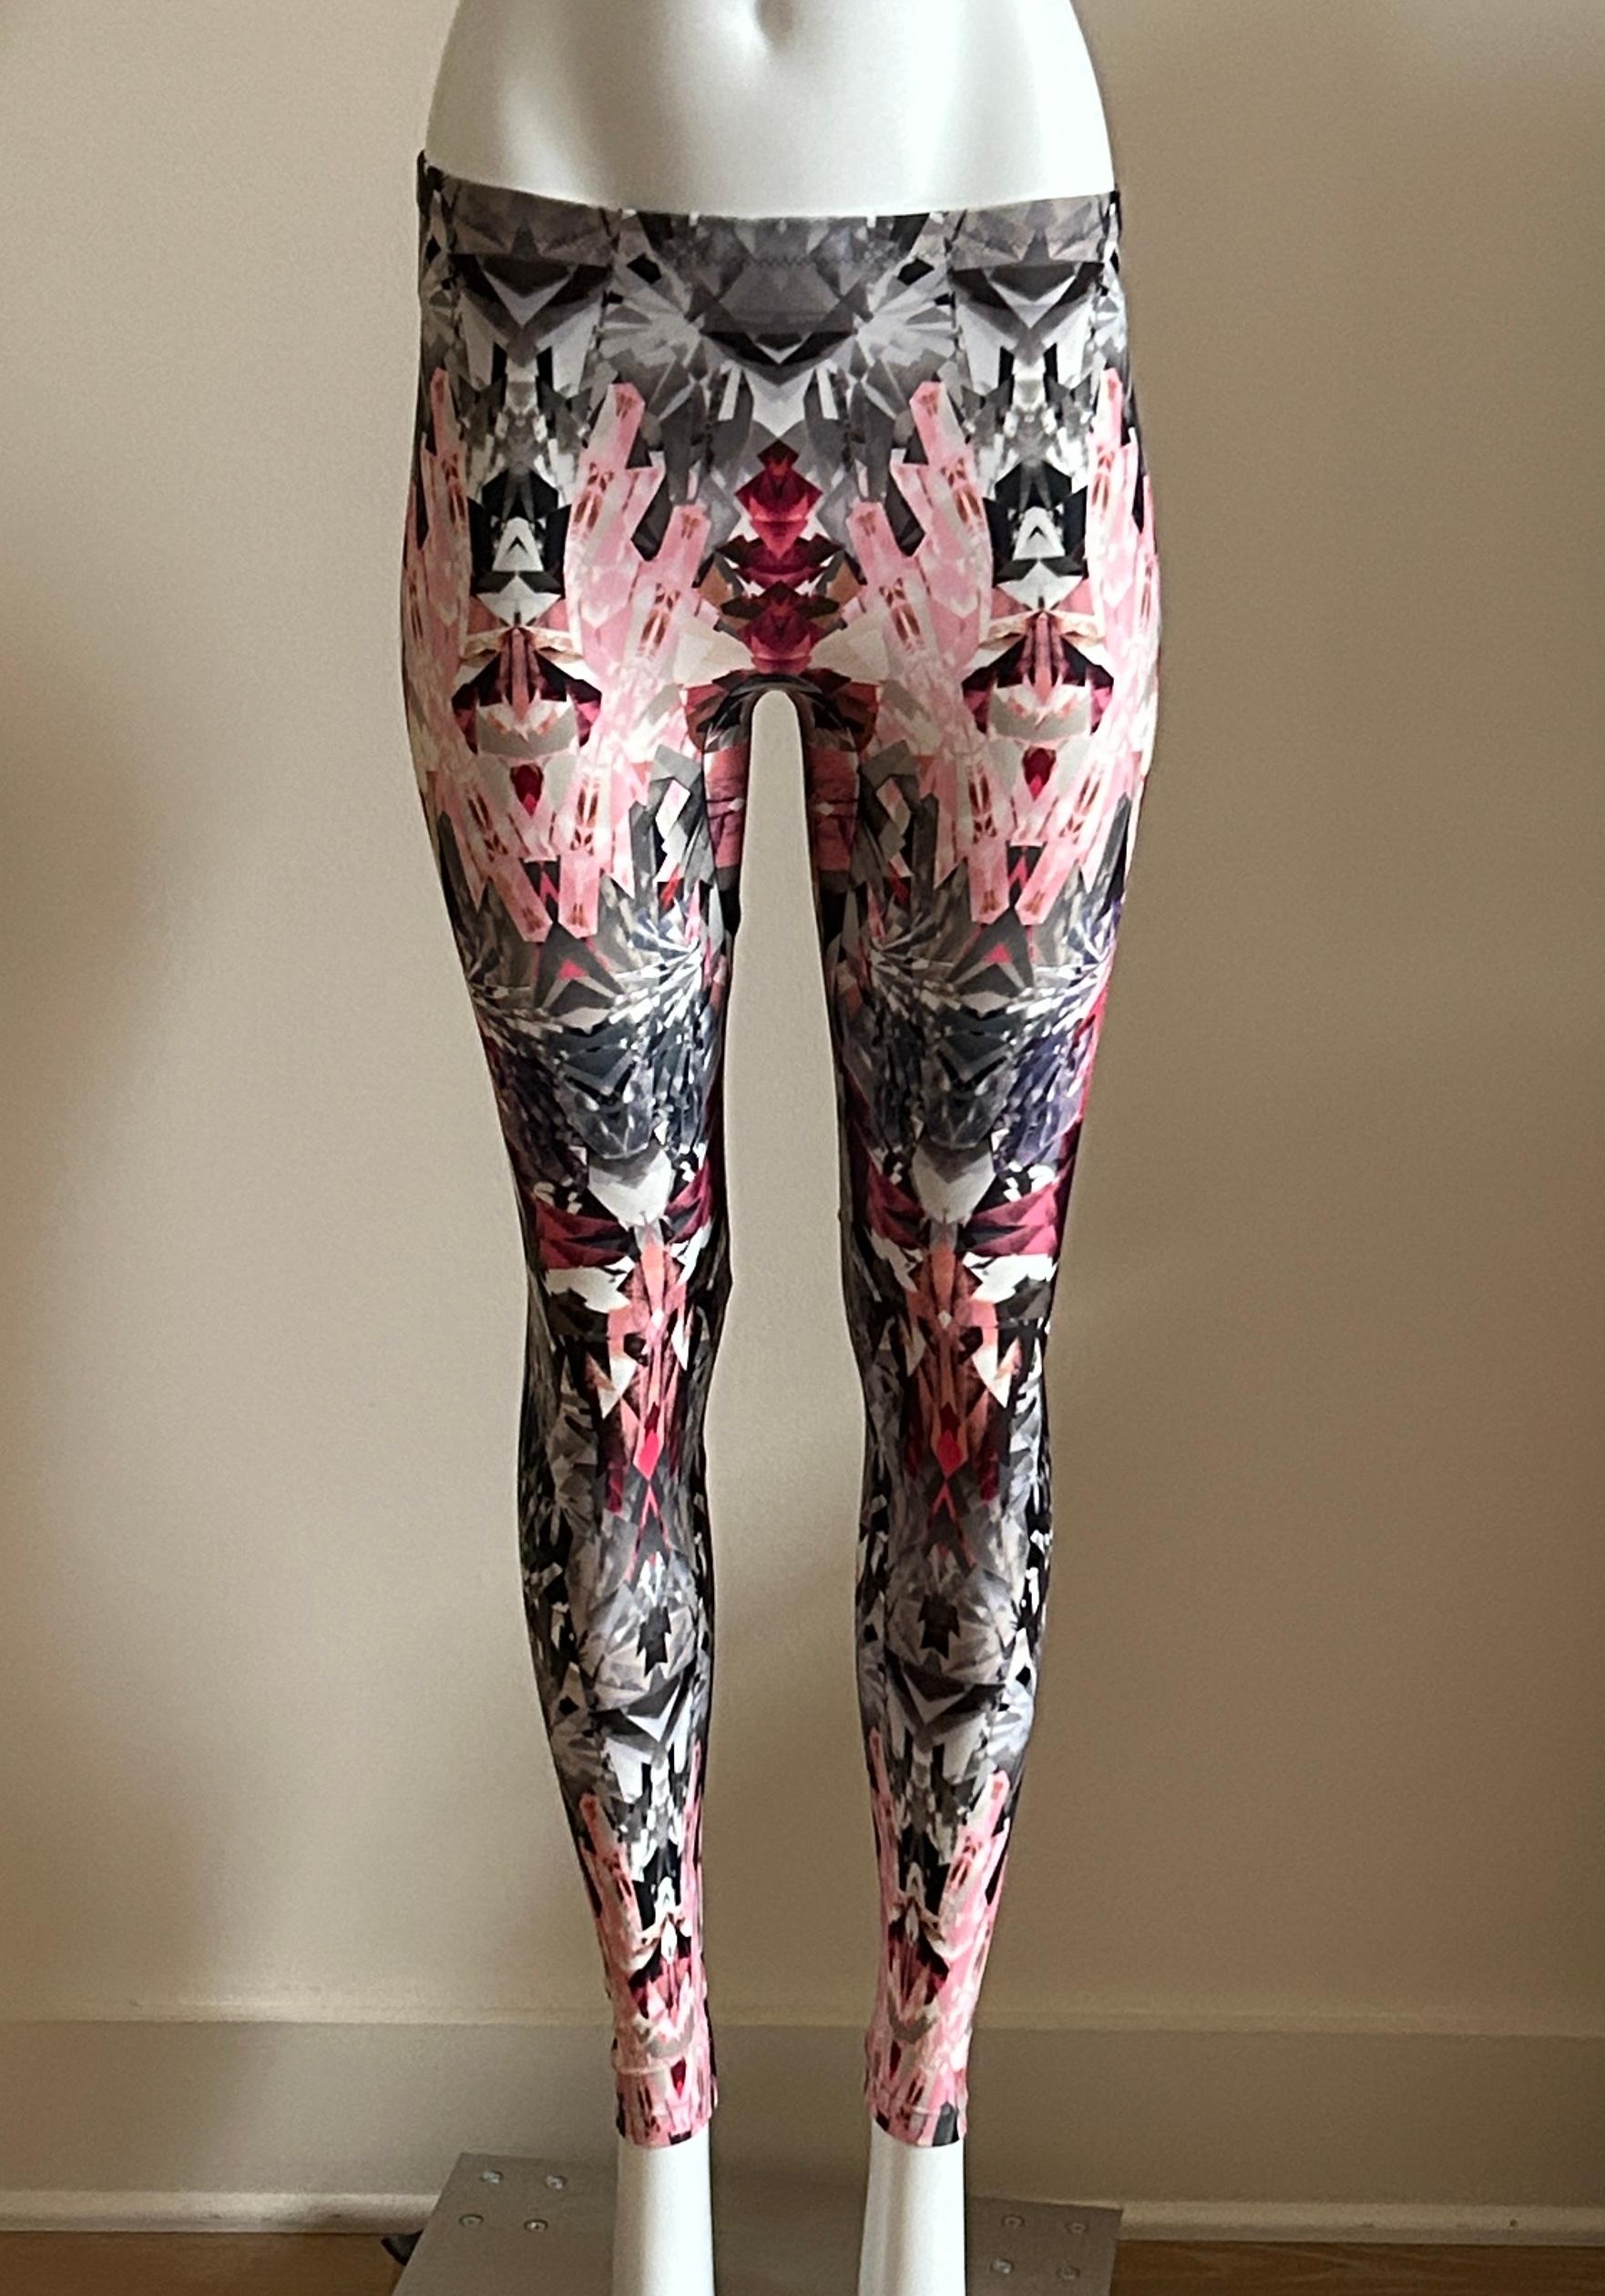 Alexander McQueen crystal print leggings in a kaleidoscopic pattern of pink, grey, white and black from the Spring/Summer 2009 collection,  